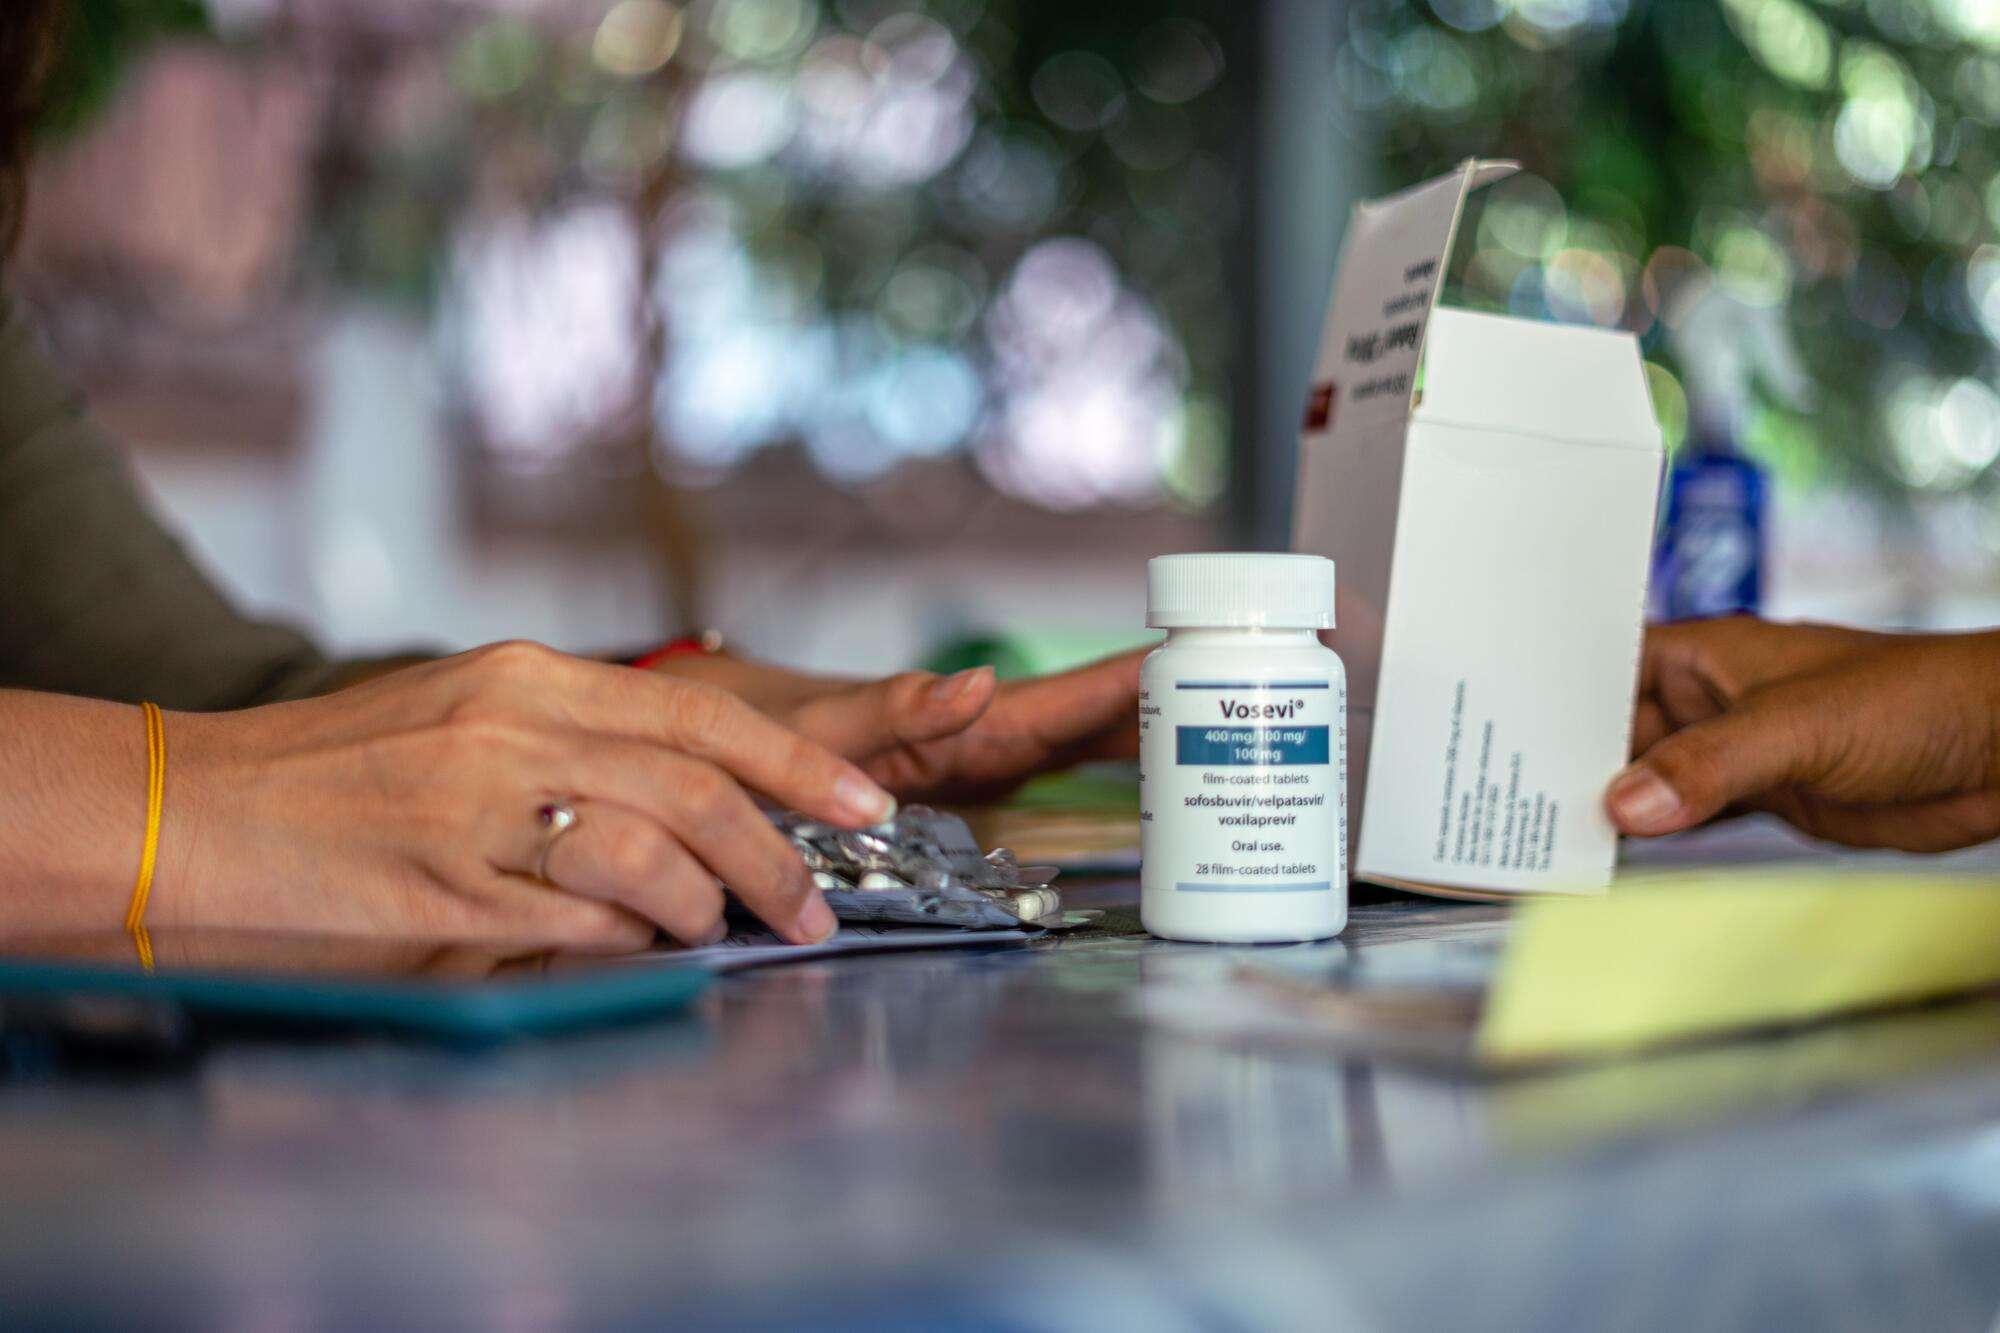 An MSF staff member prepares medication for a patient at an MSF office, in Yangon. Myanmar, April 2021.